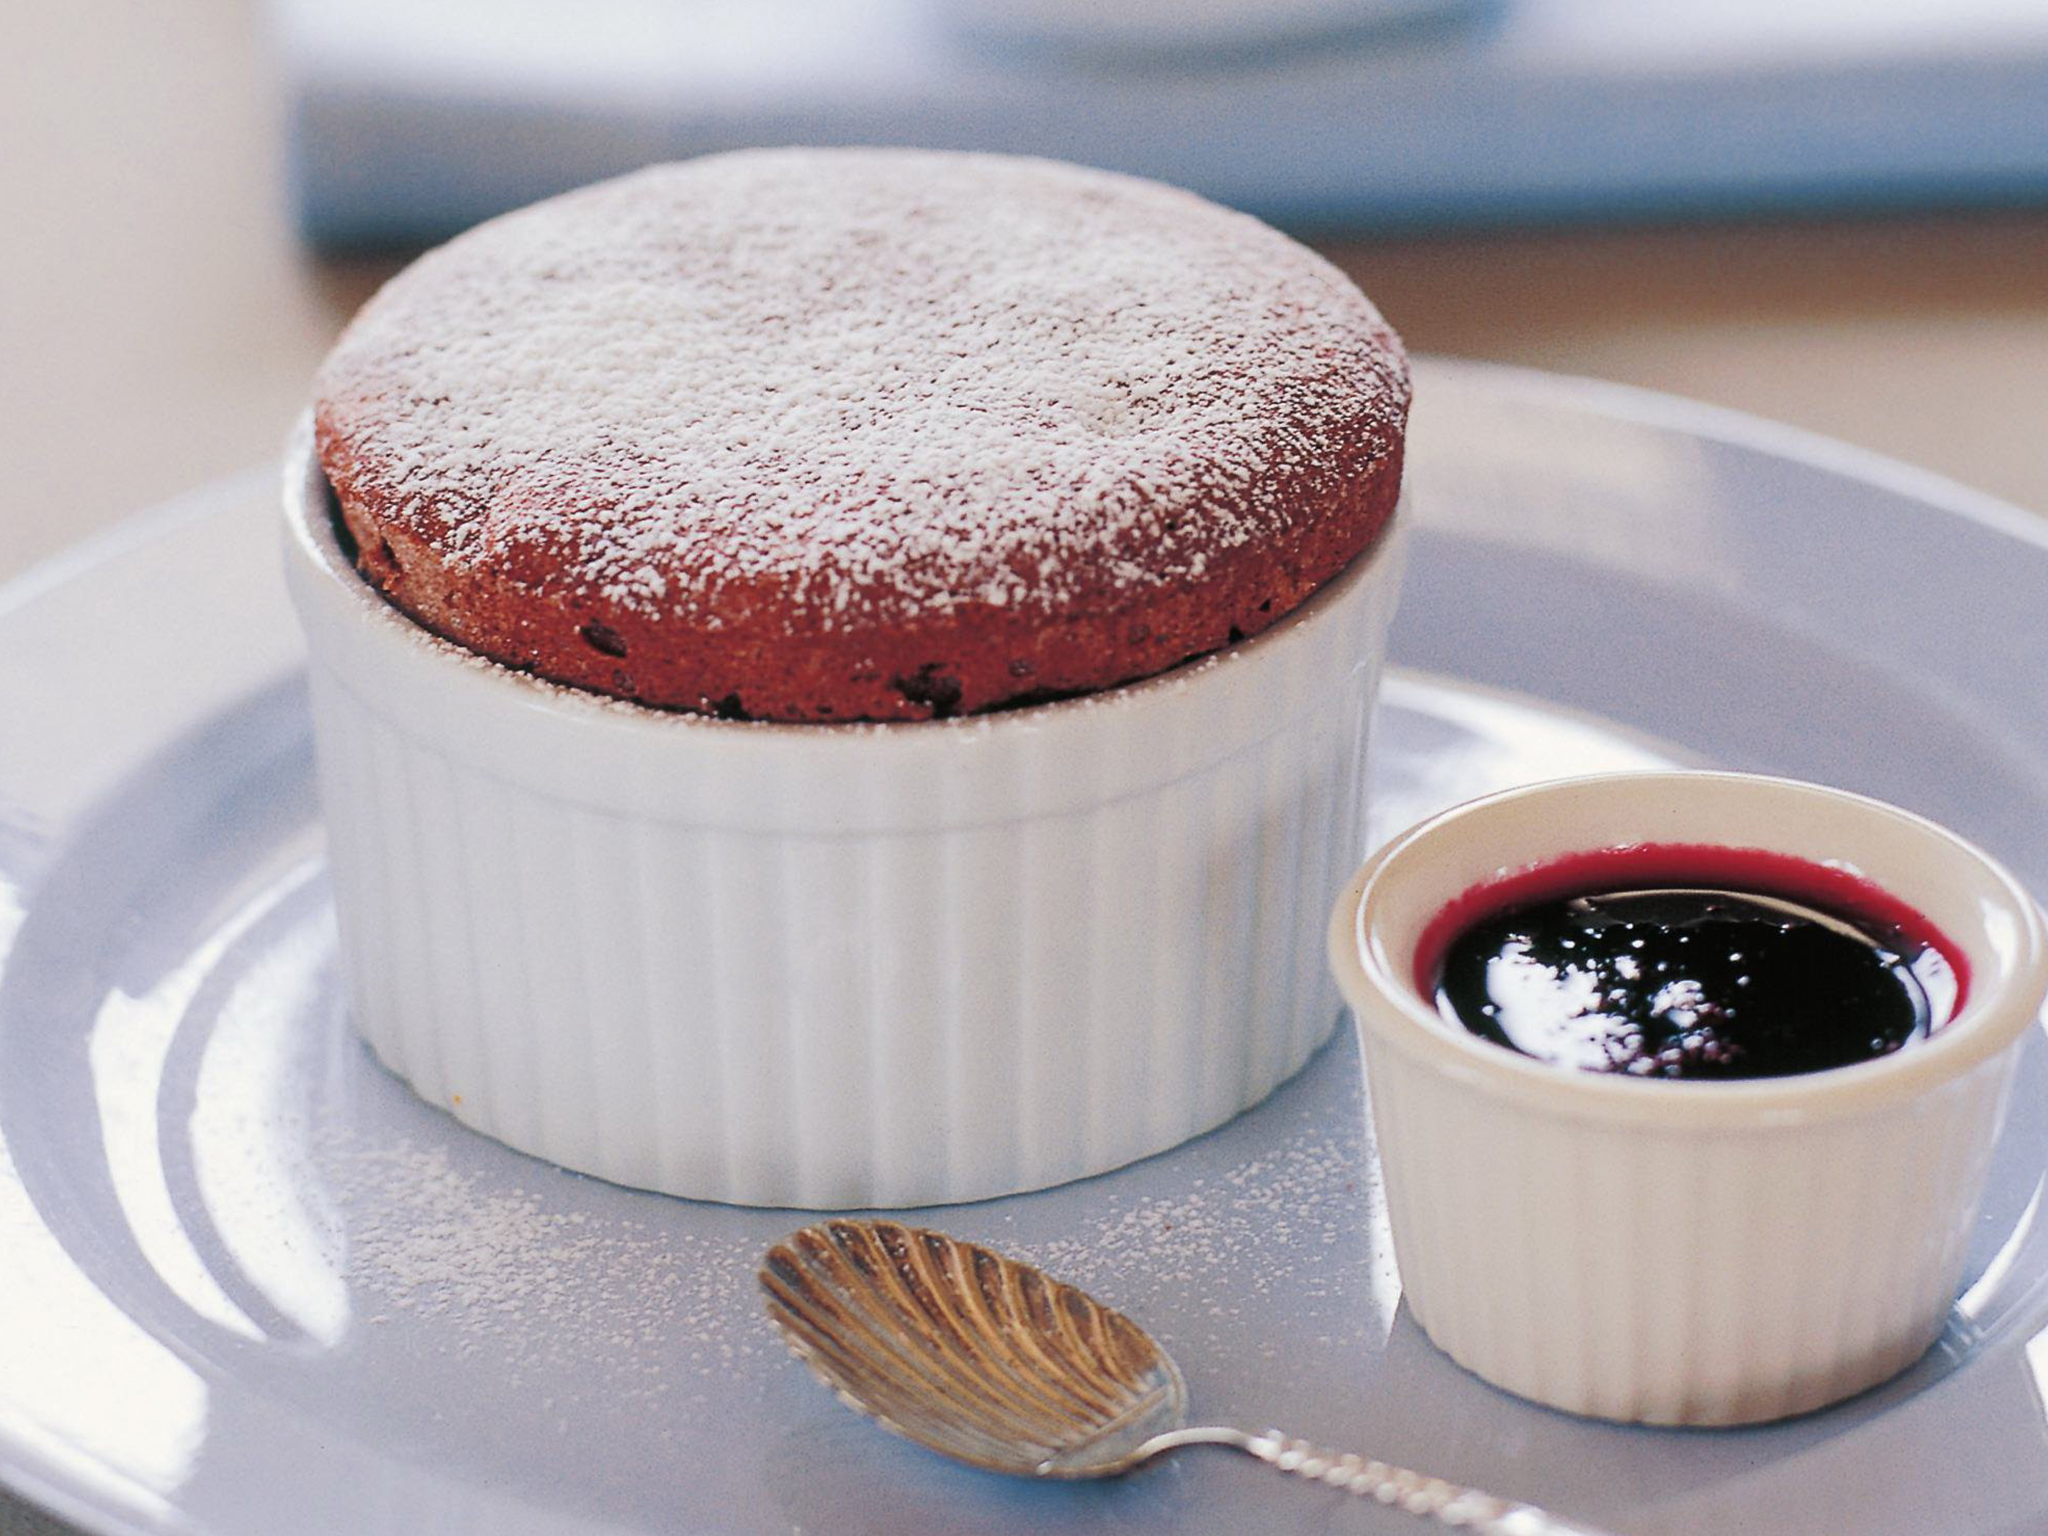 Chocolate soufflé with raspberry coulis